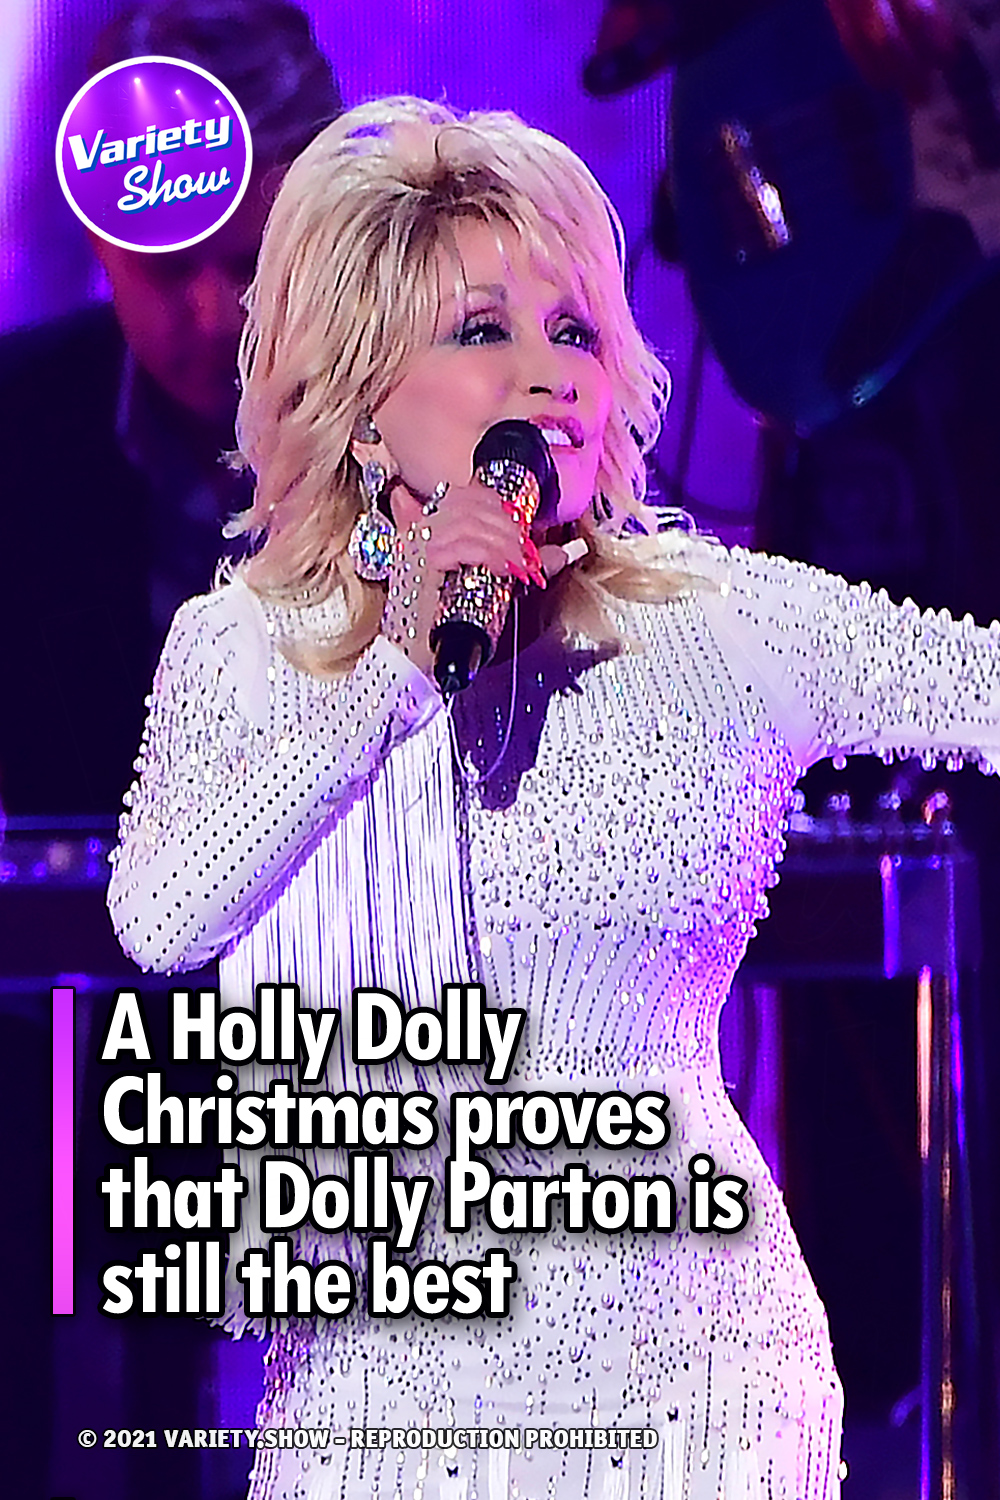 A Holly Dolly Christmas proves that Dolly Parton is still the best